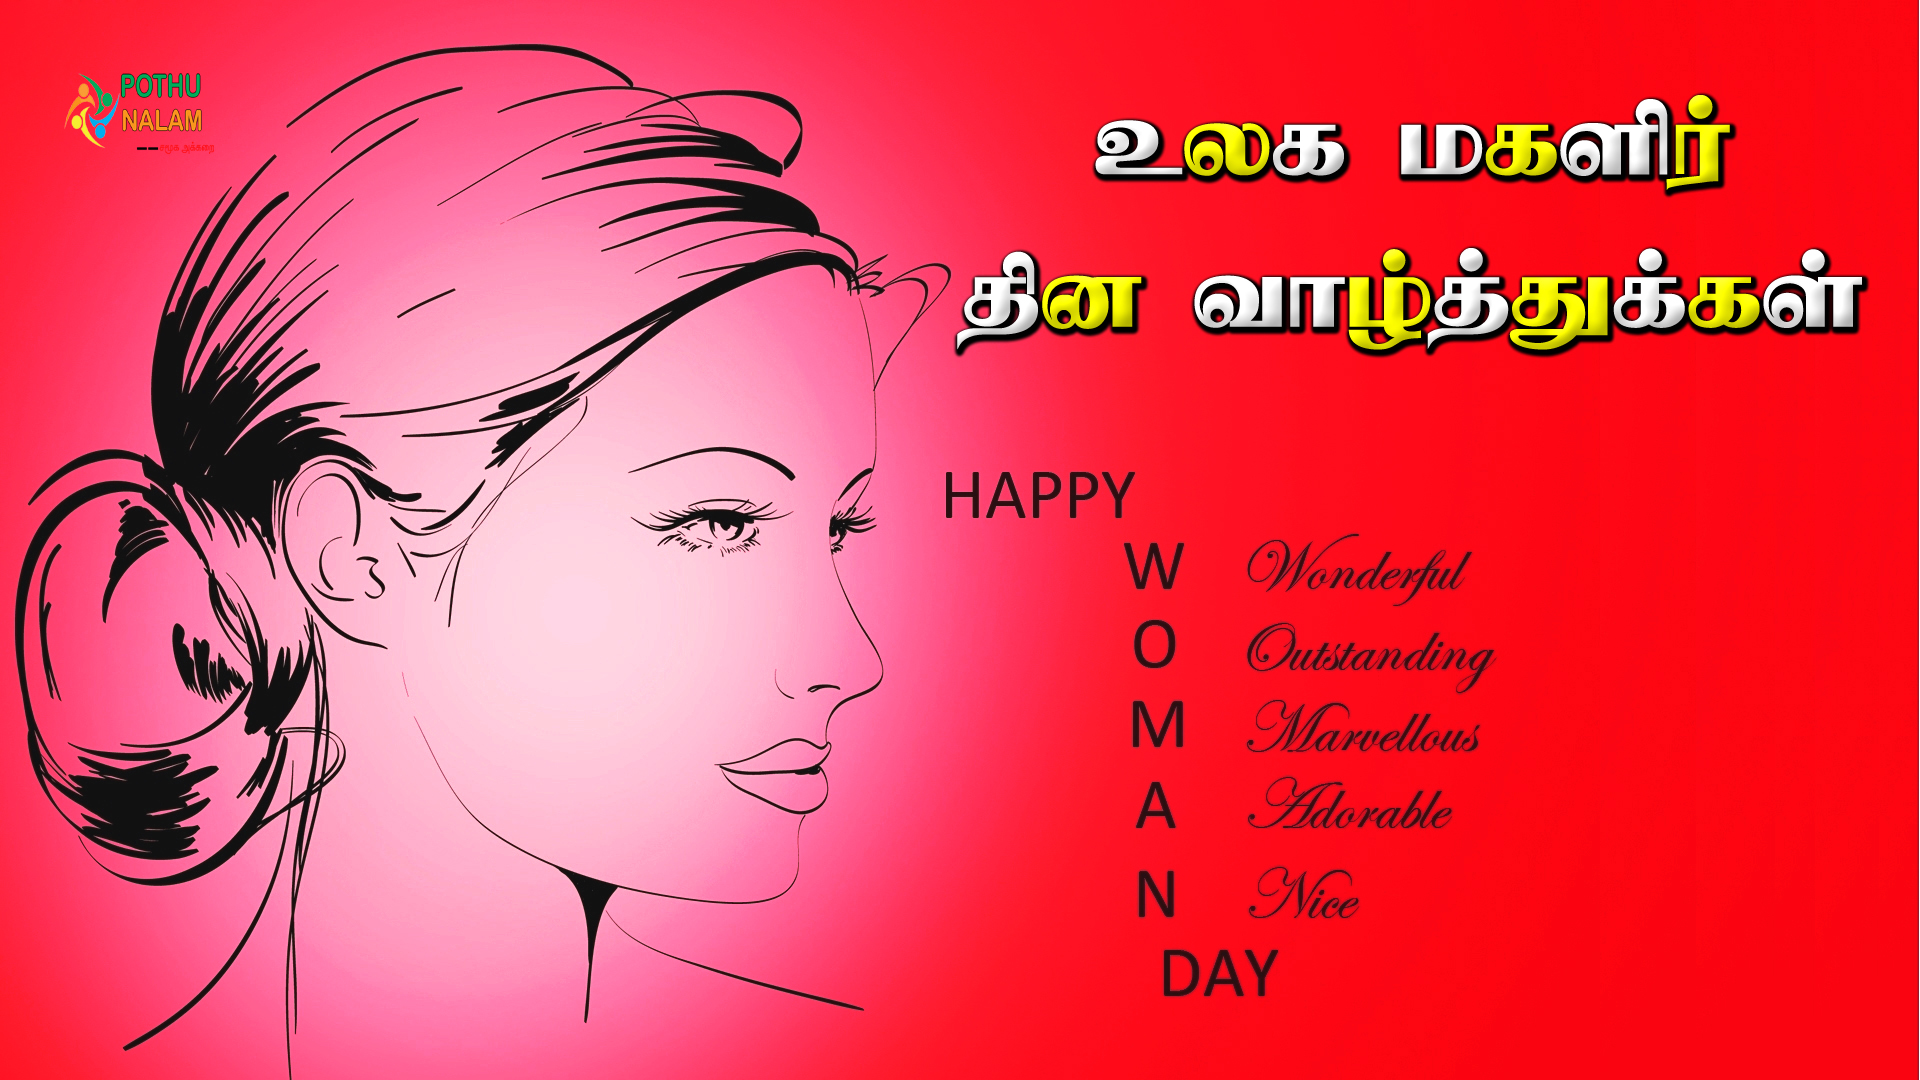  women's day wishes in tamil